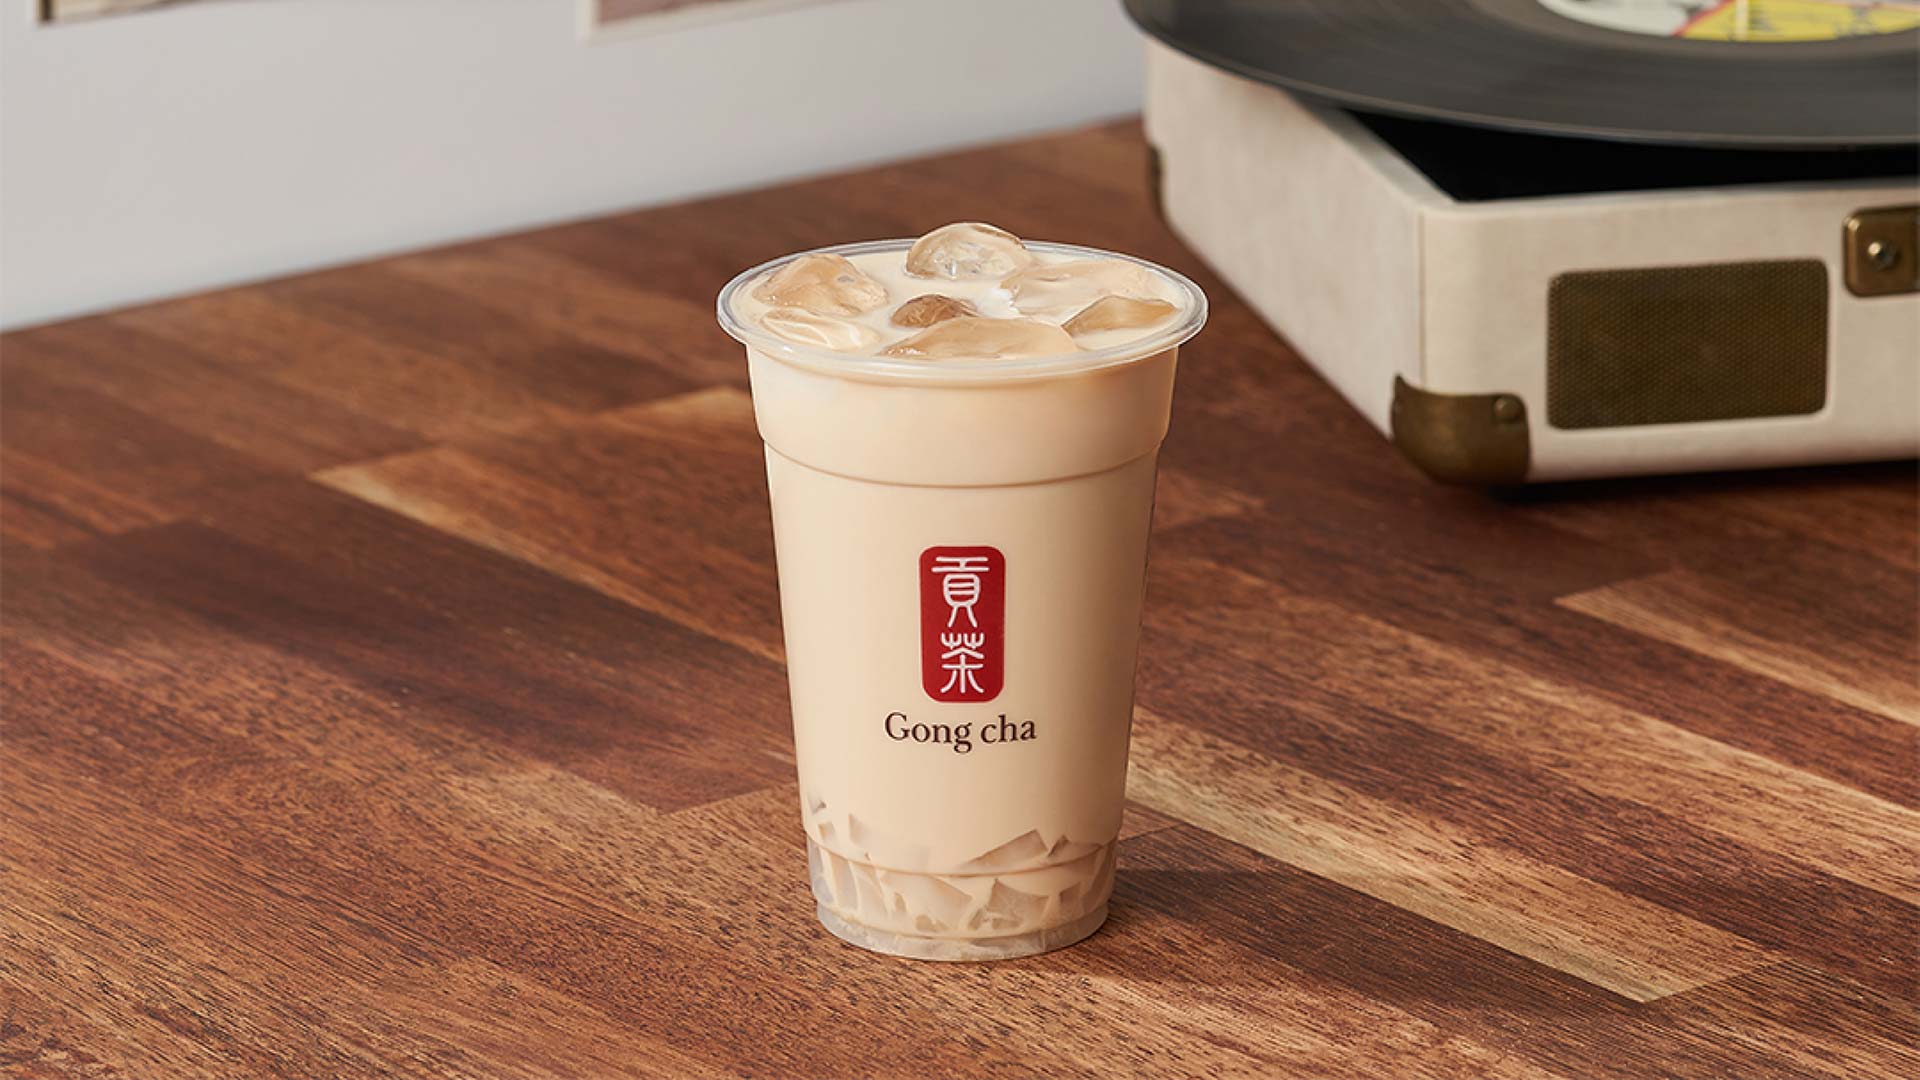 Gong cha beverage on table